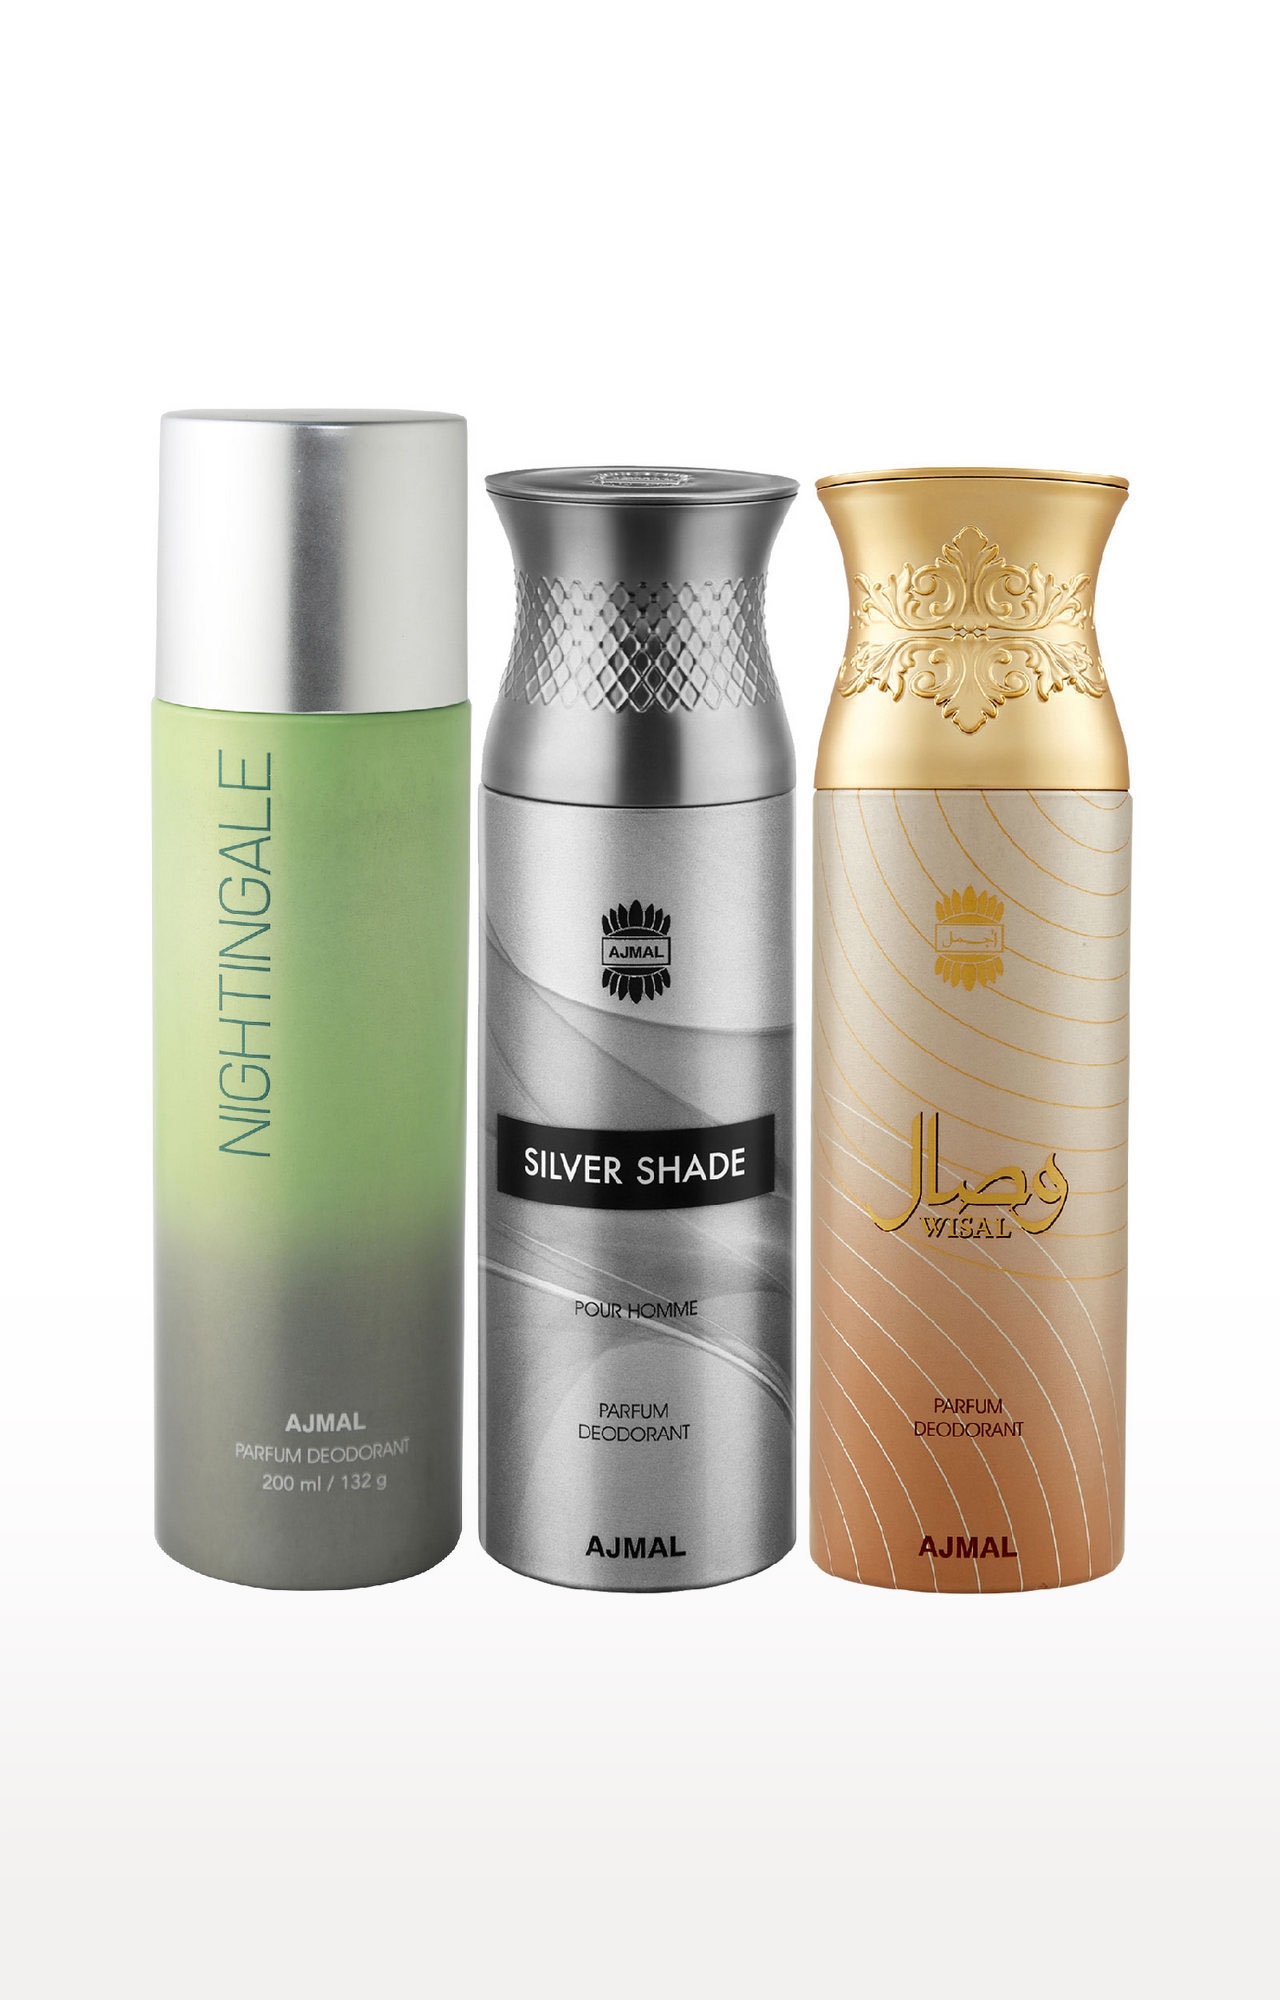 Ajmal | Ajmal 1 Nightingale for Men & Women, 1 Ajmal Silver Shade for Men and 1 Wisal for Women High Quality Deodorants each 200ML Combo pack of 3 (Total 600ML) + 3 Parfum Testers